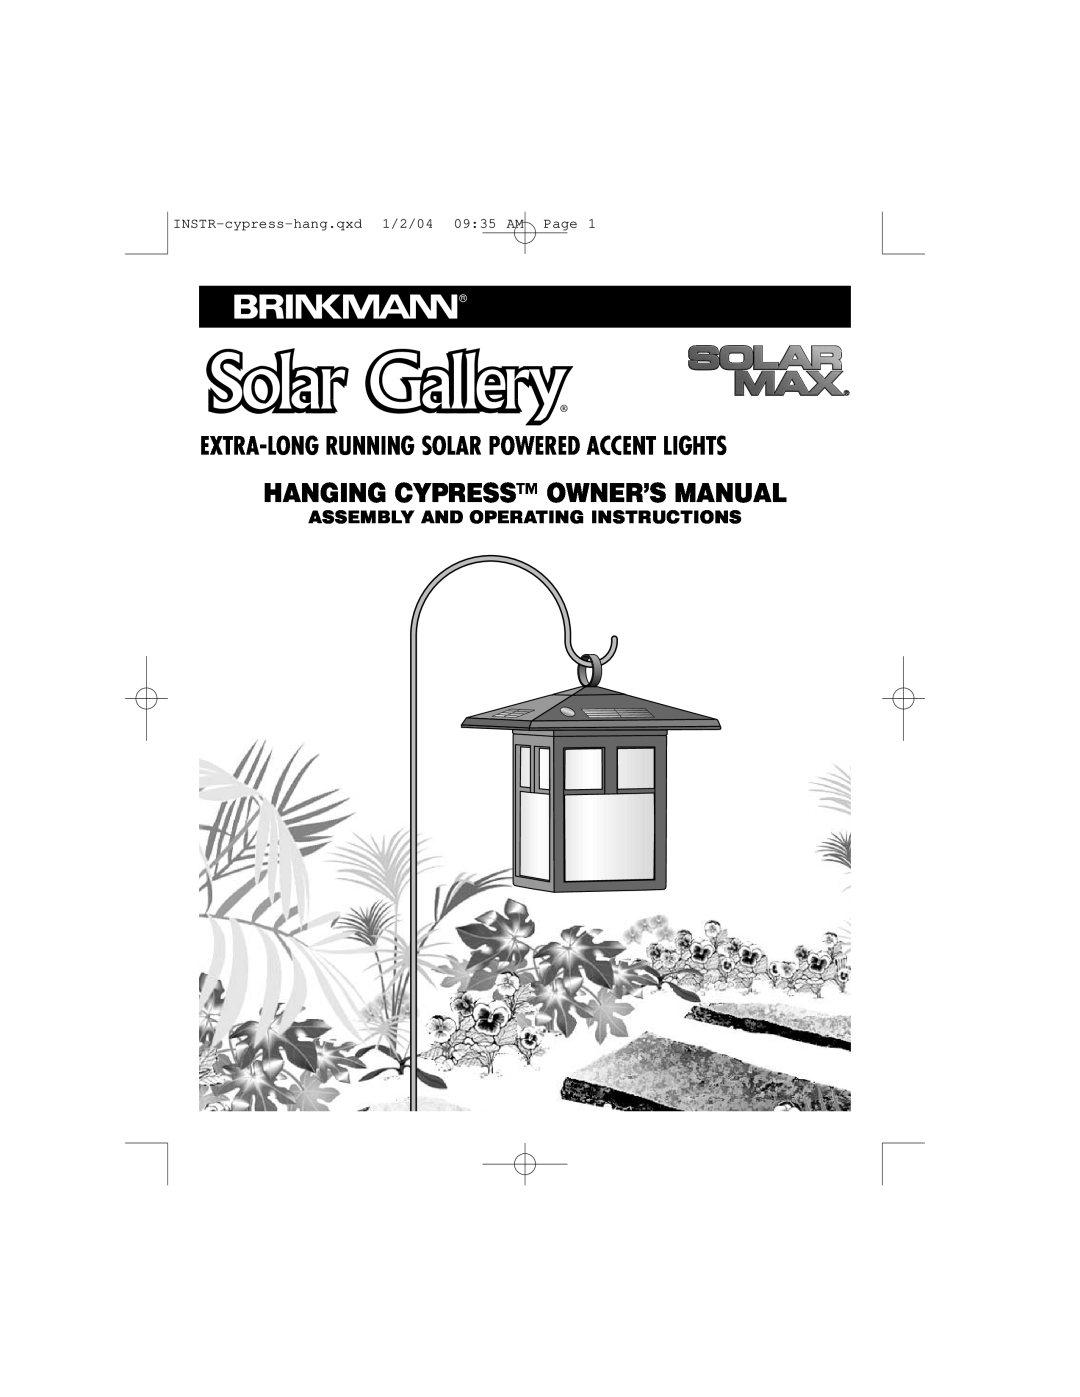 Brinkmann 822-1526-2 owner manual INSTR-cypress-hang.qxd1/2/04 09 35 AM Page, Solar Gallery 